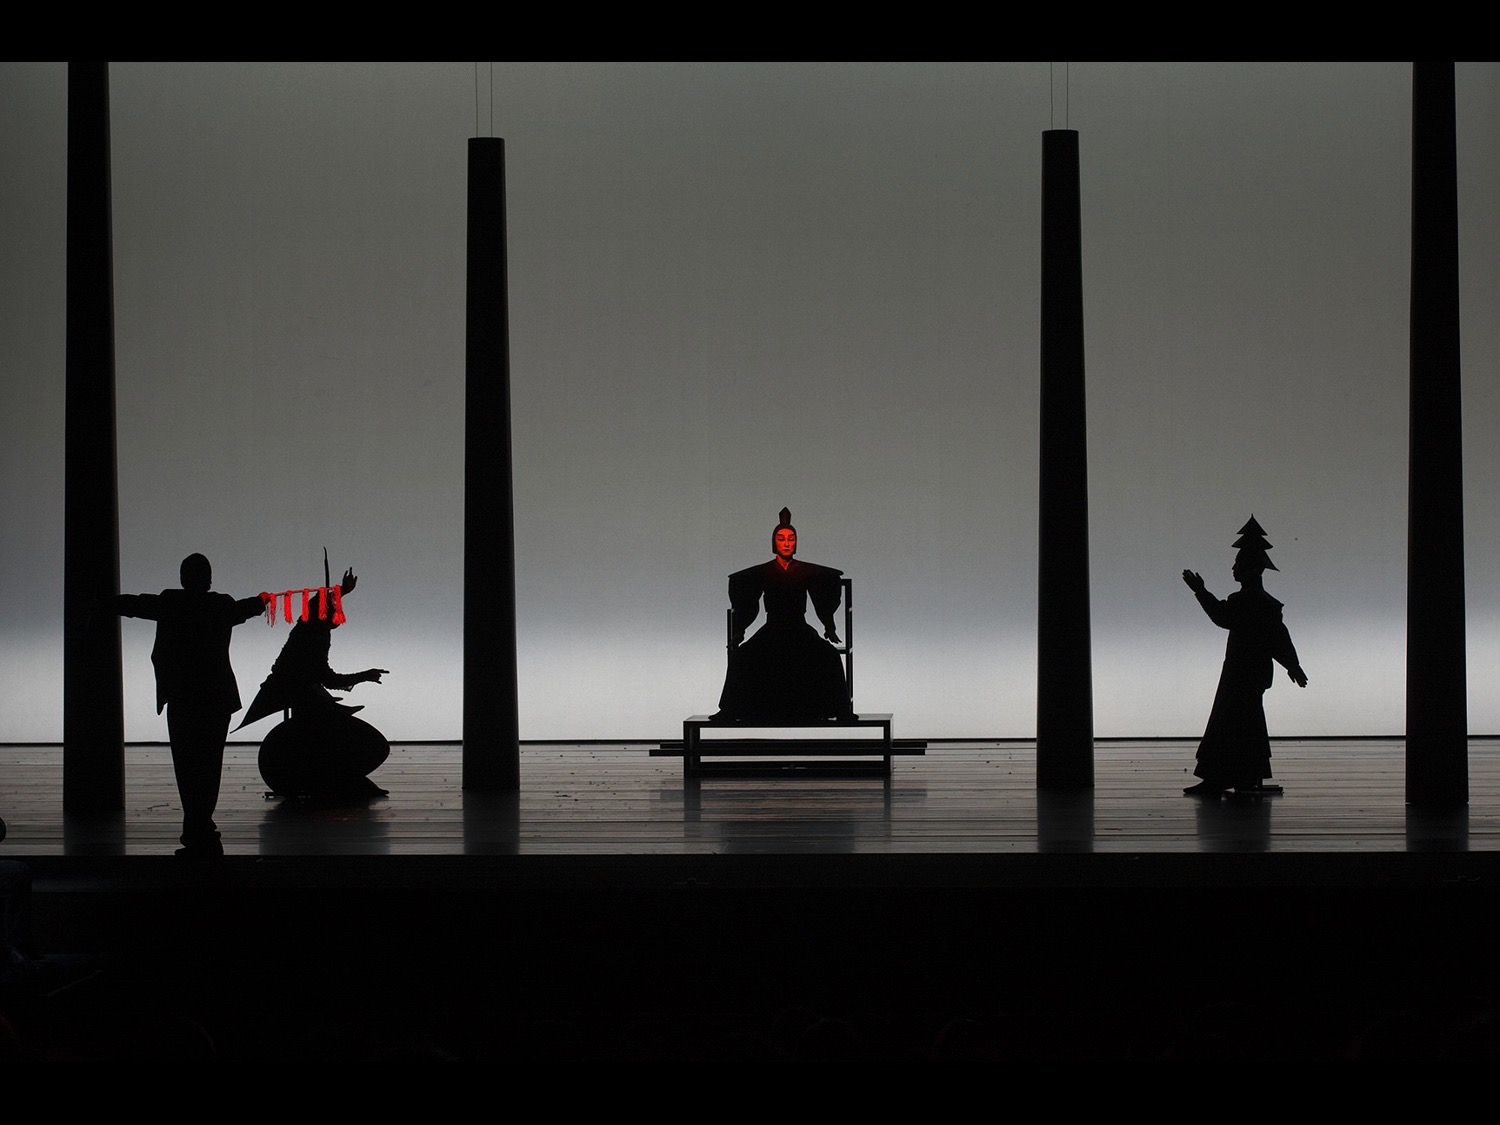  1433, The Grand Voyage
National Chiang Kai-Shek Cultural Center
Taipei, 2010
(photo courtesy of Change Performing Arts) 